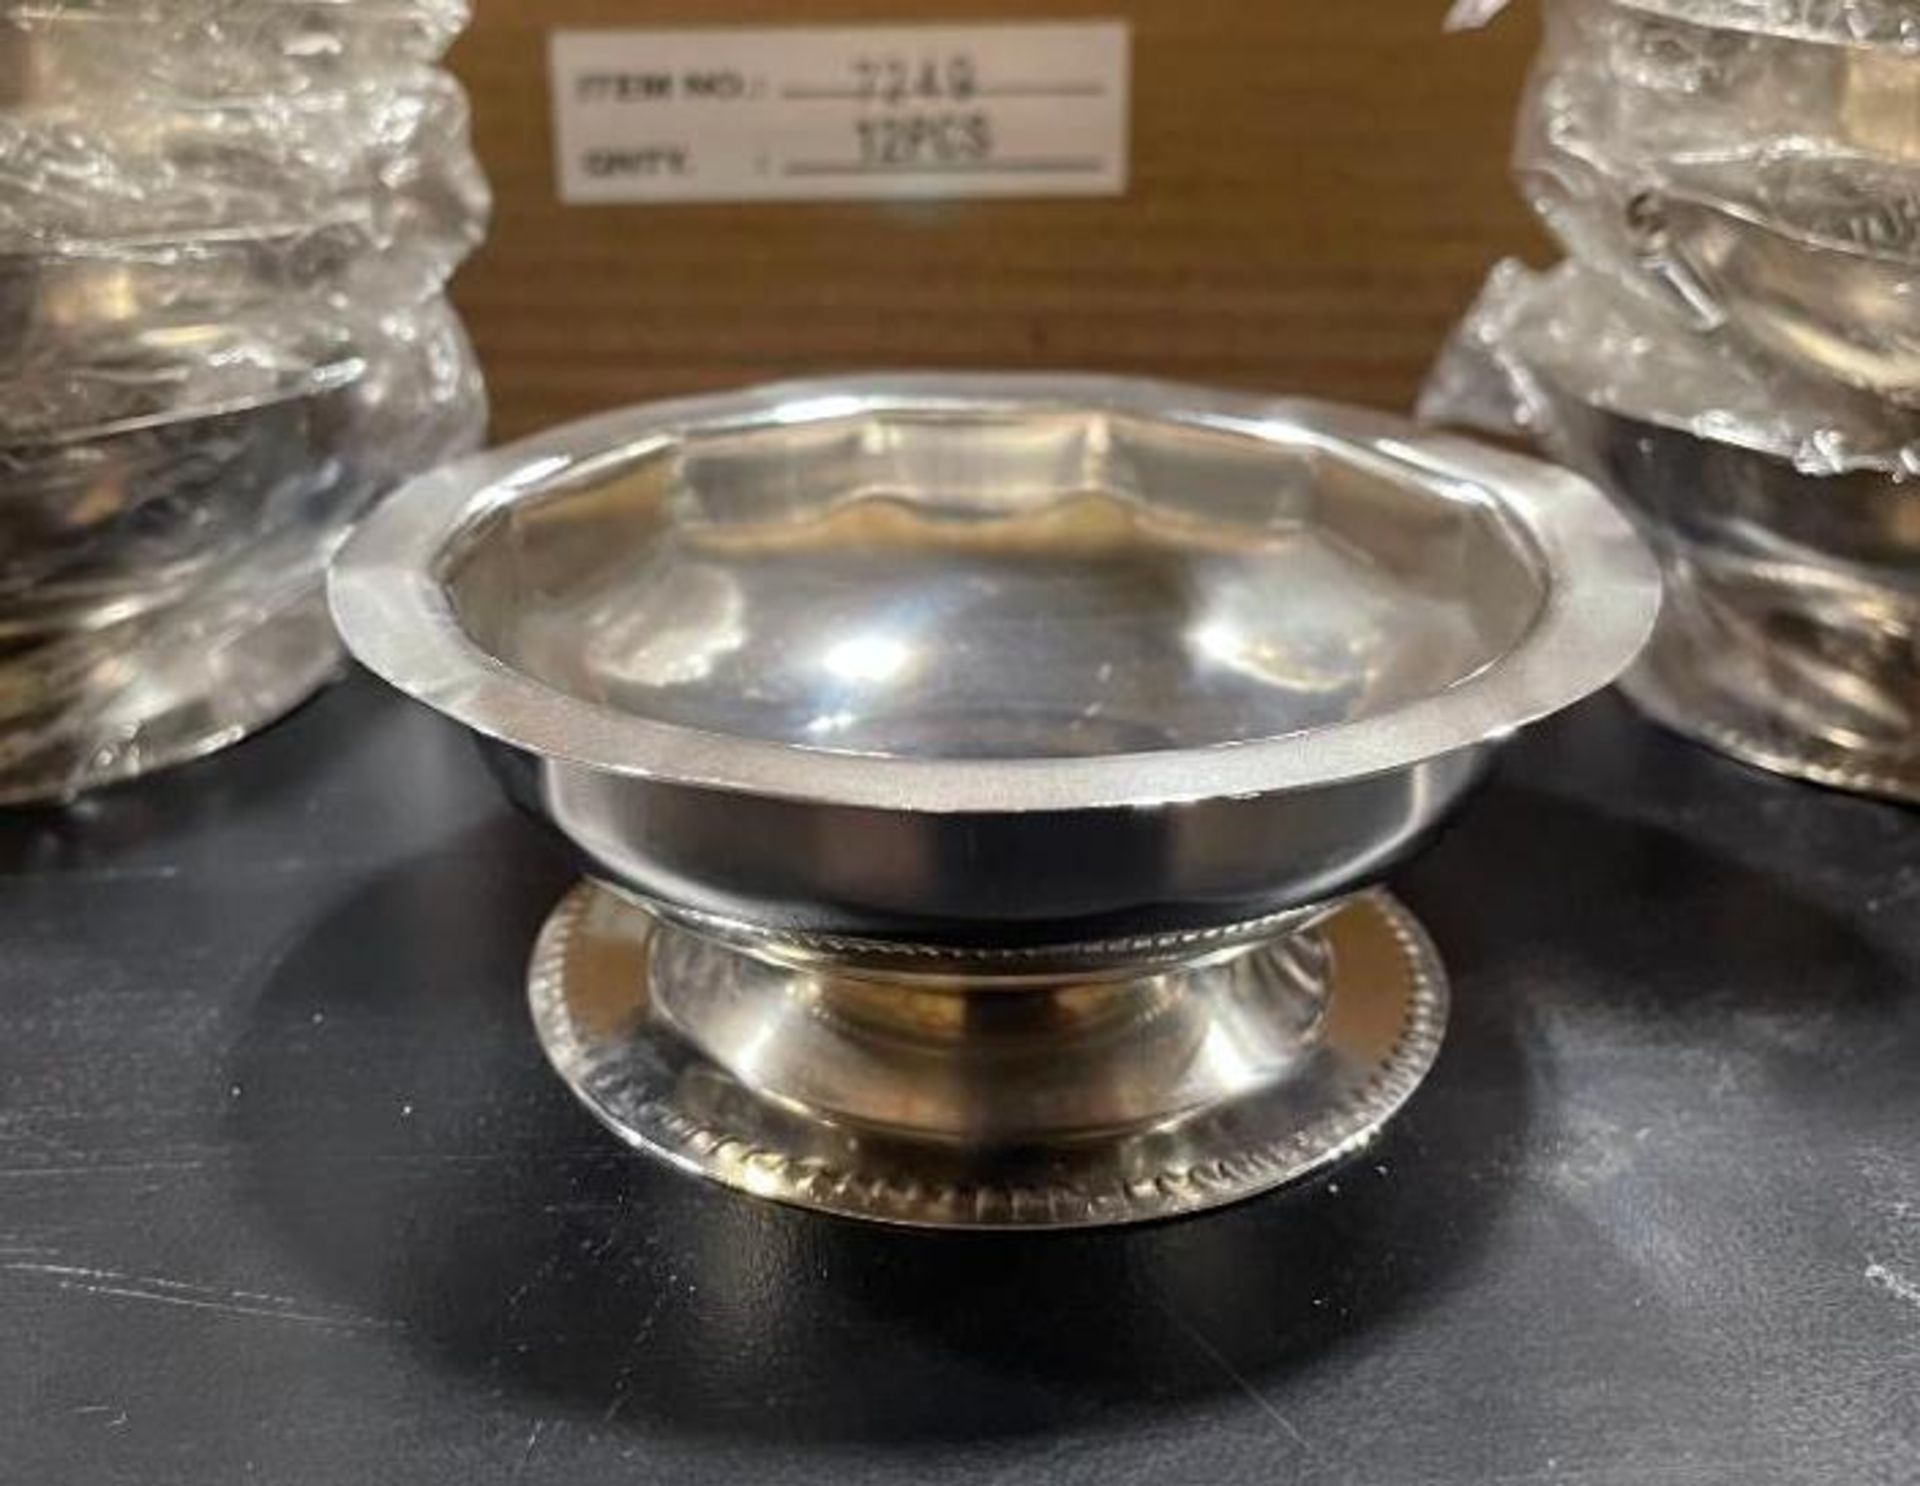 3.5 OZ. STAINLESS STEEL SUNDAE DISH - LOT OF 12 - NEW - Image 2 of 5